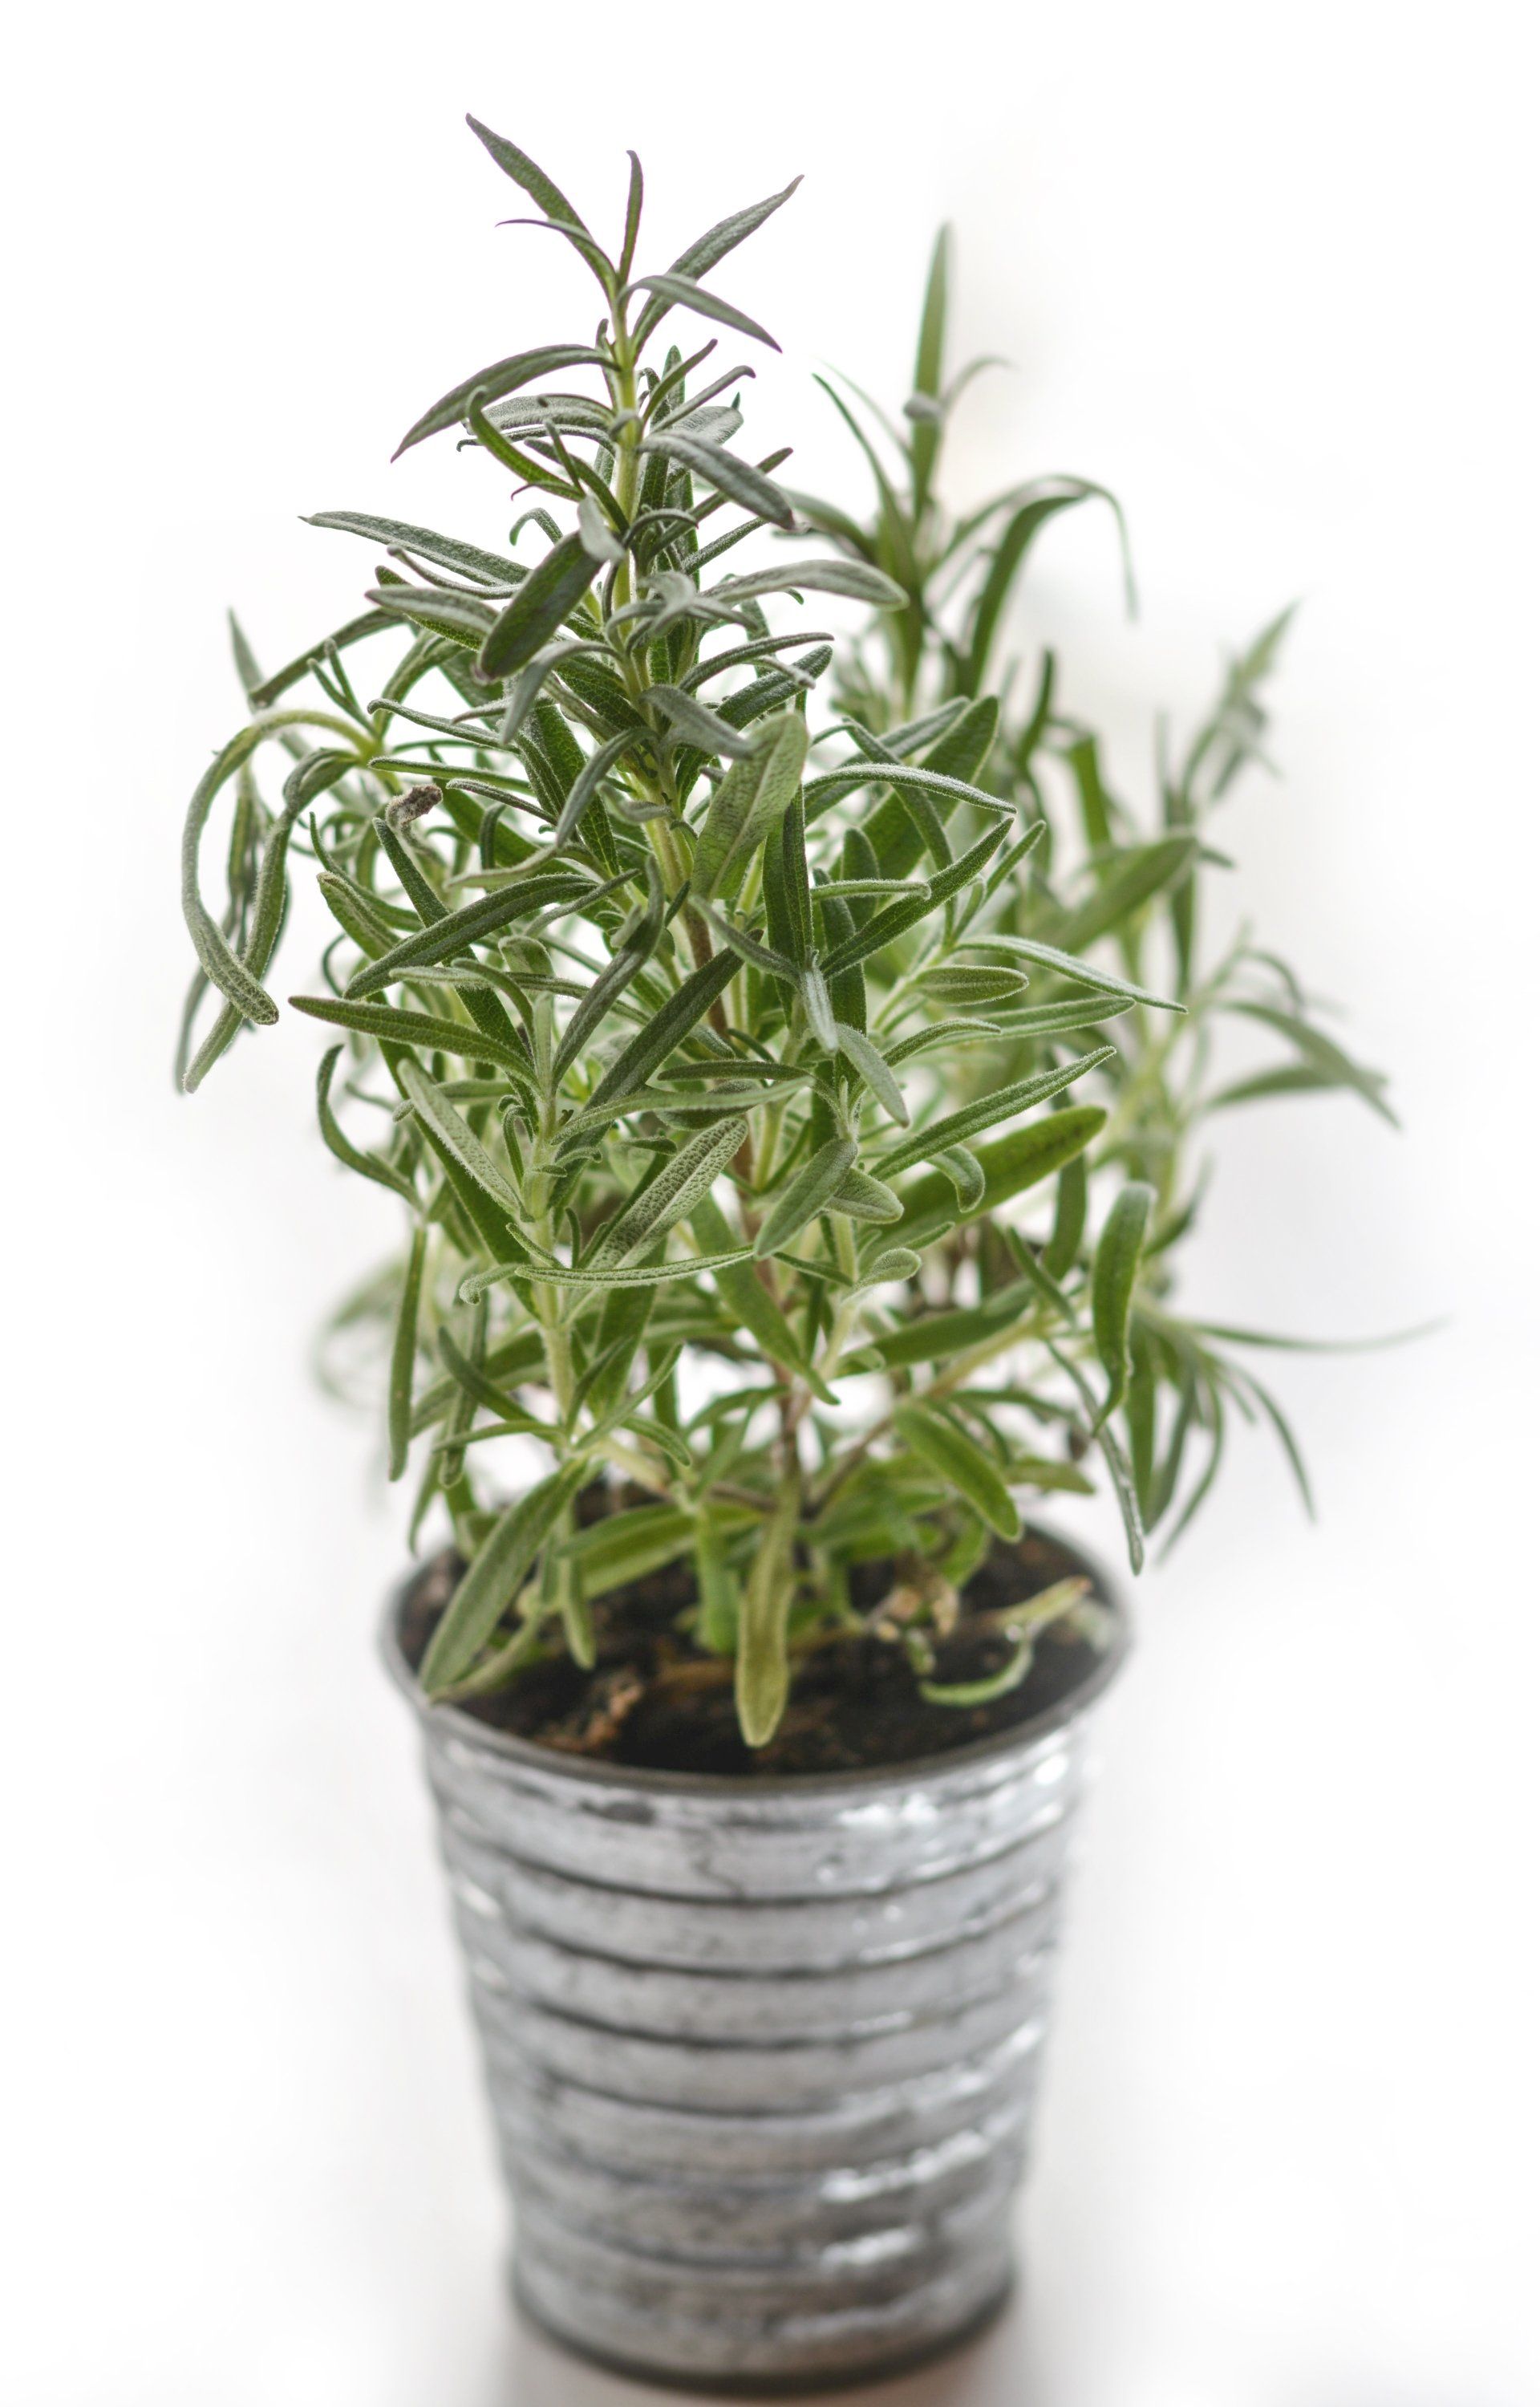 a small rosemary plant in a metal pot on a white background .